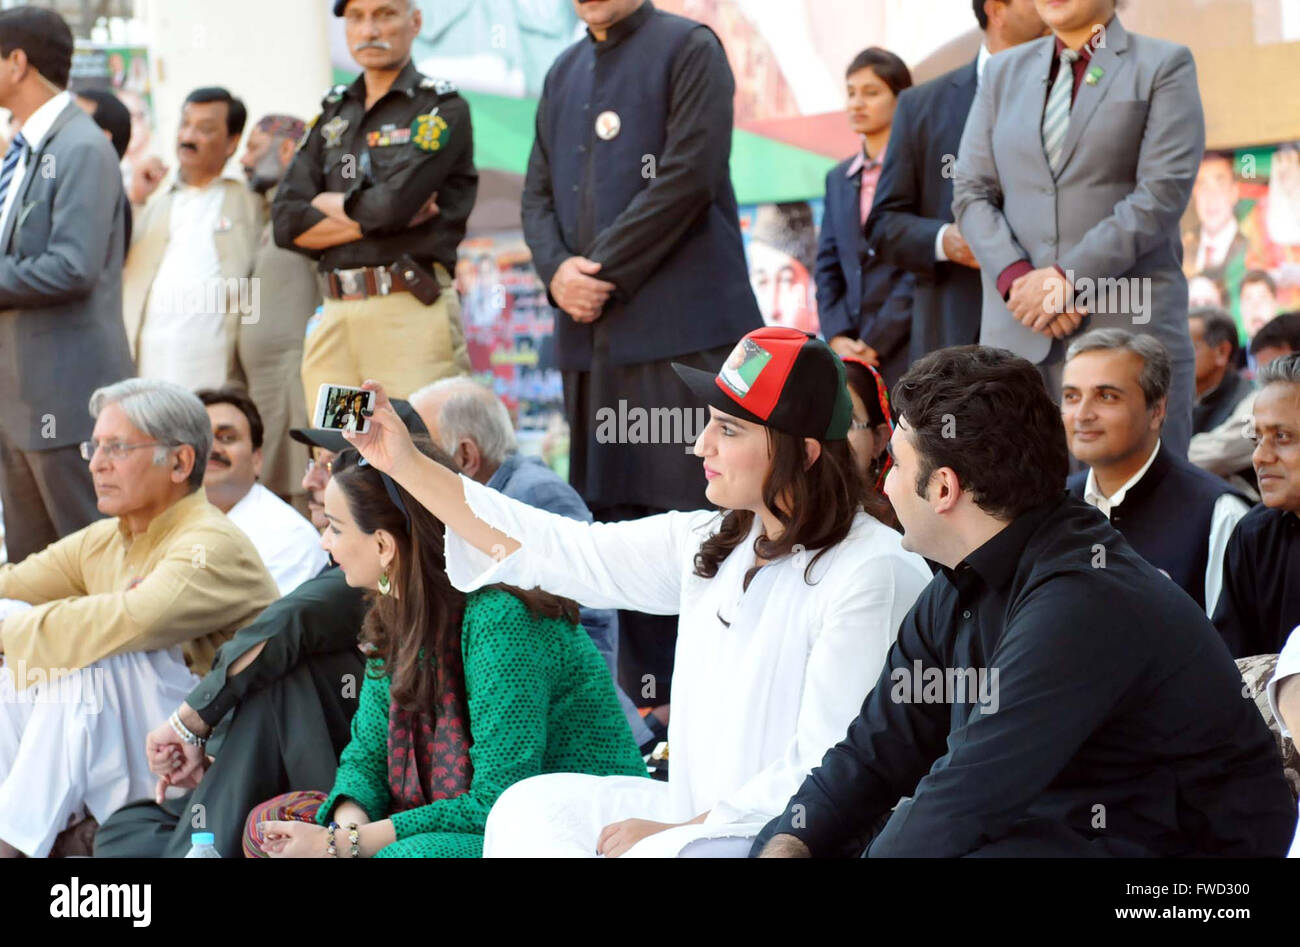 Peoples Party (PPP) Chairman, Bilawal Bhutto Zardari and Bakhtawar Bhutto Zardari along others sit on stage on occasion of 37th death anniversary commemorate of Peoples Party (PPP) Founder, Zulfiqar Ali Bhutto held at Bhutto's Mausoleum in Garhi Khuda Bux on Monday, April 04, 2016. Stock Photo